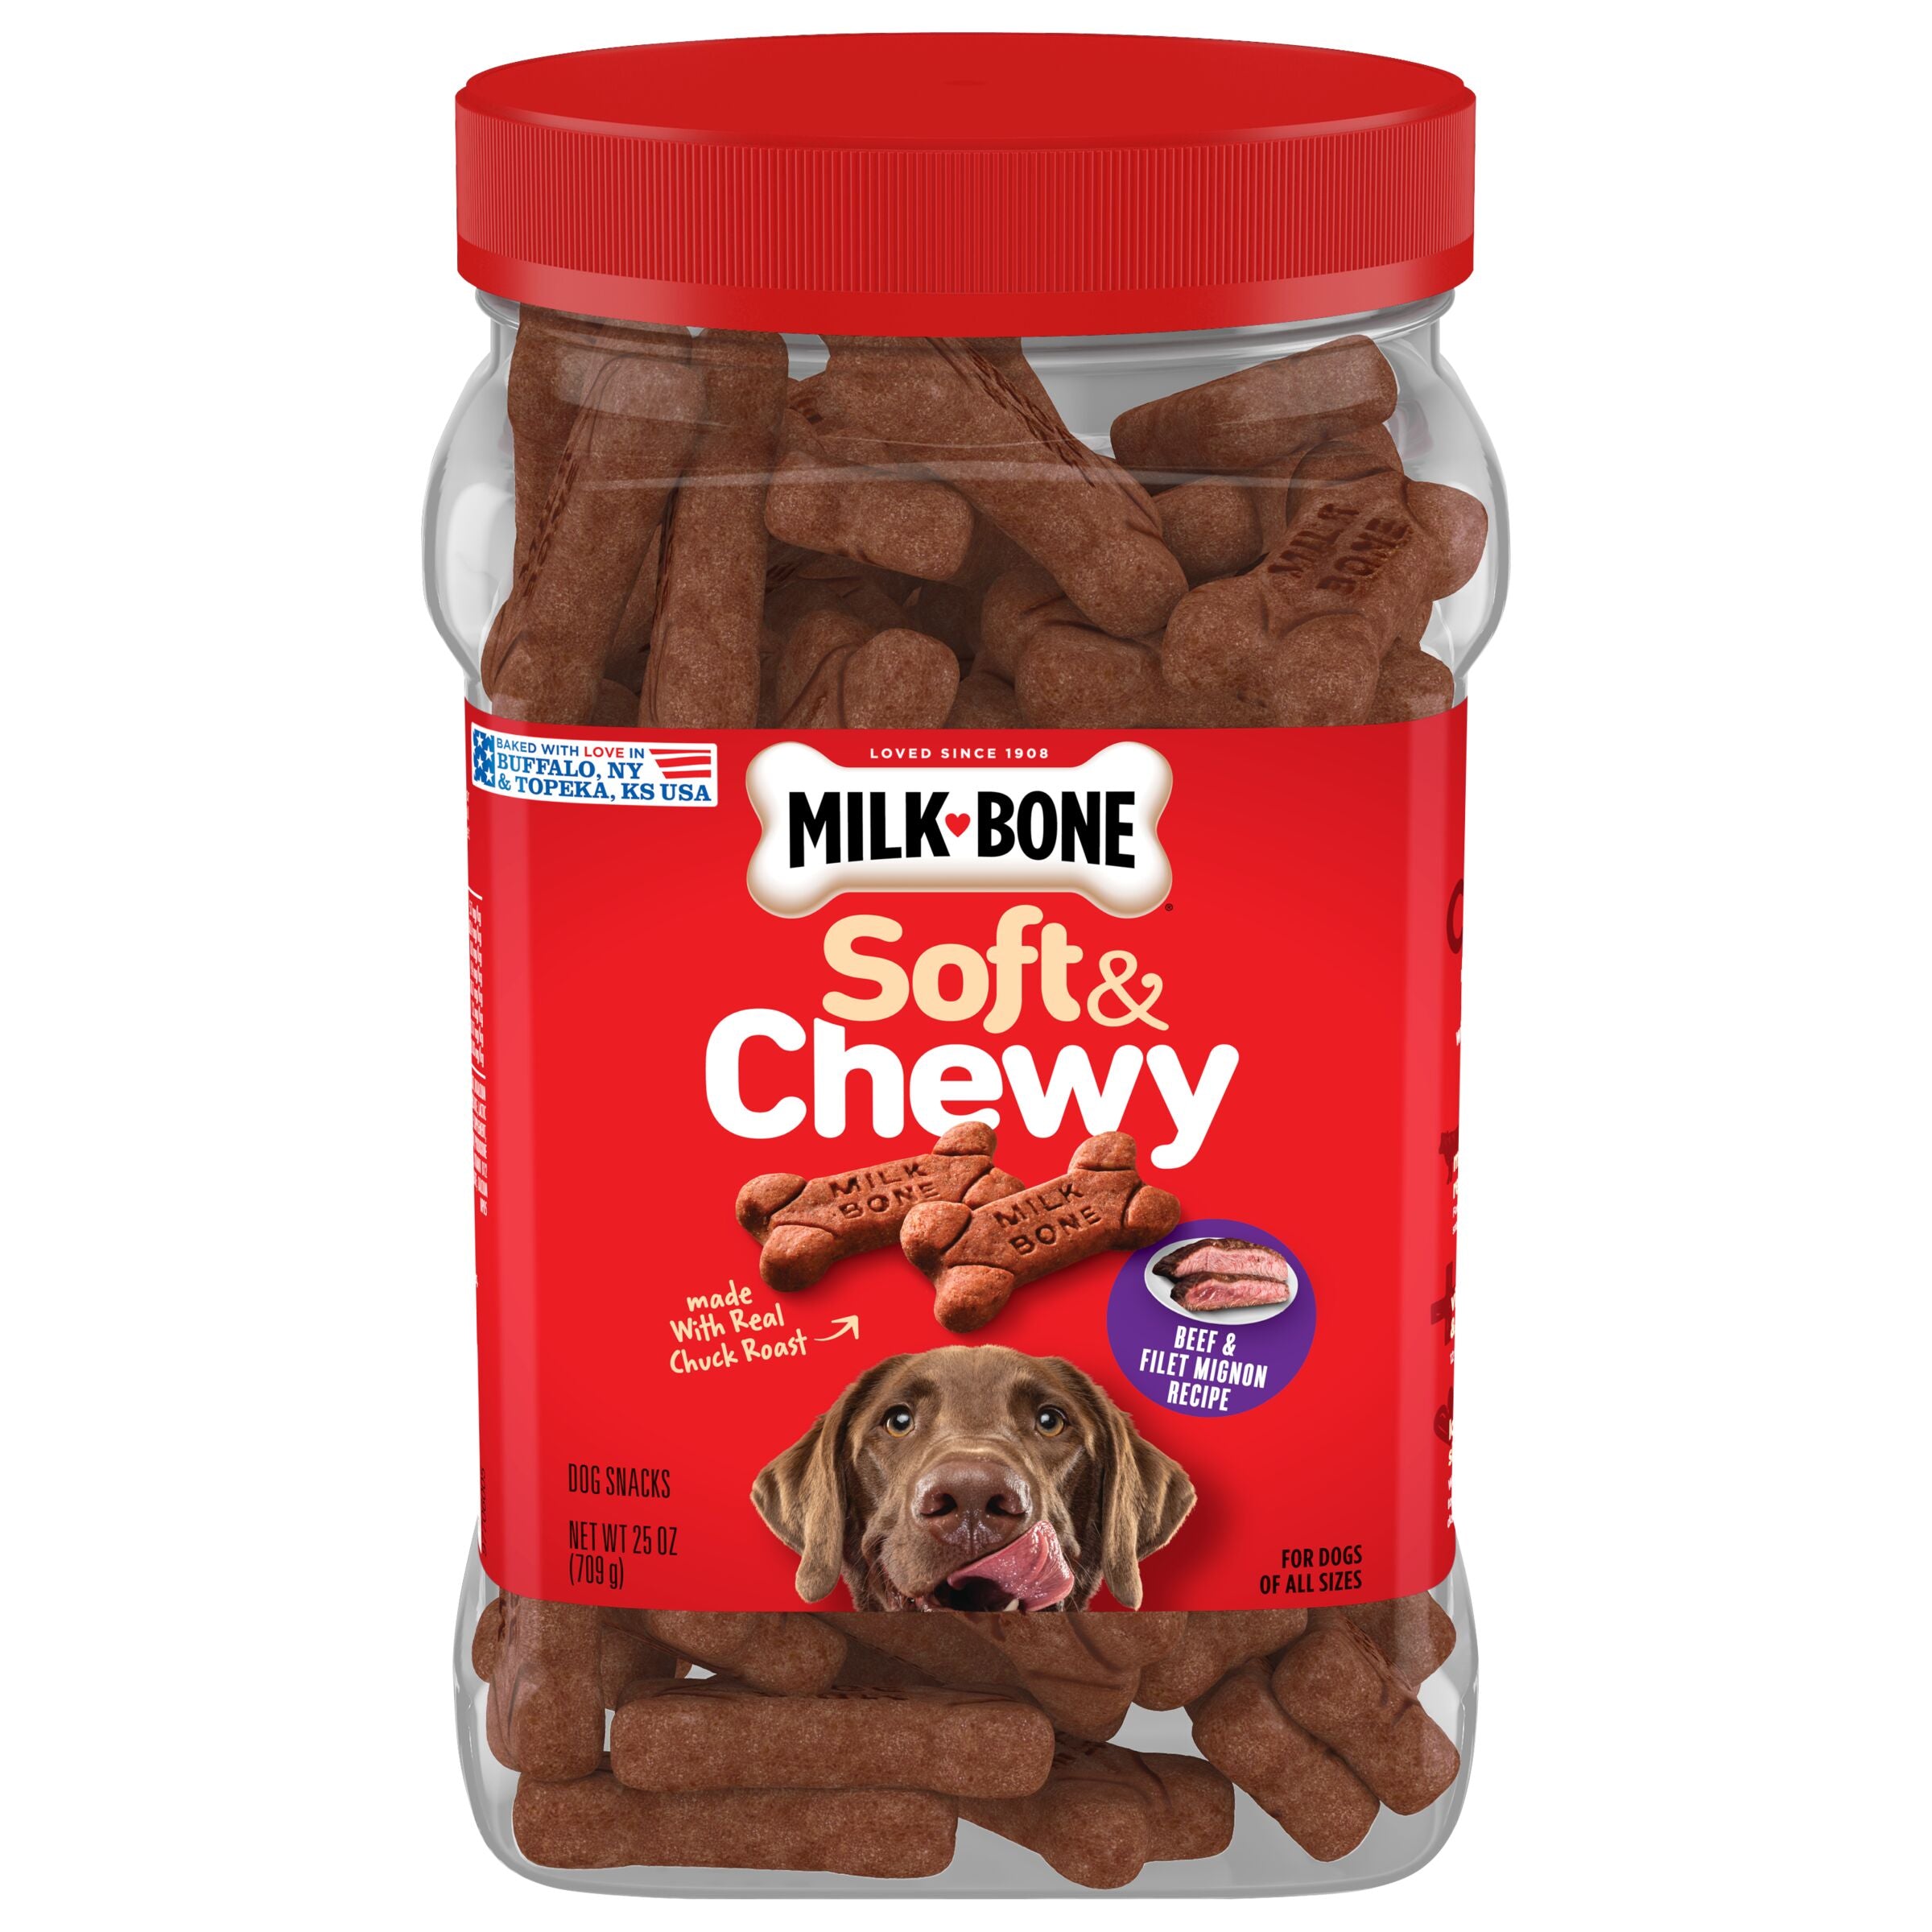 Milk-Bone Soft and Chewy Dog Treats, Beef and Filet Mignon Recipe With Chuck Roast, 25 oz